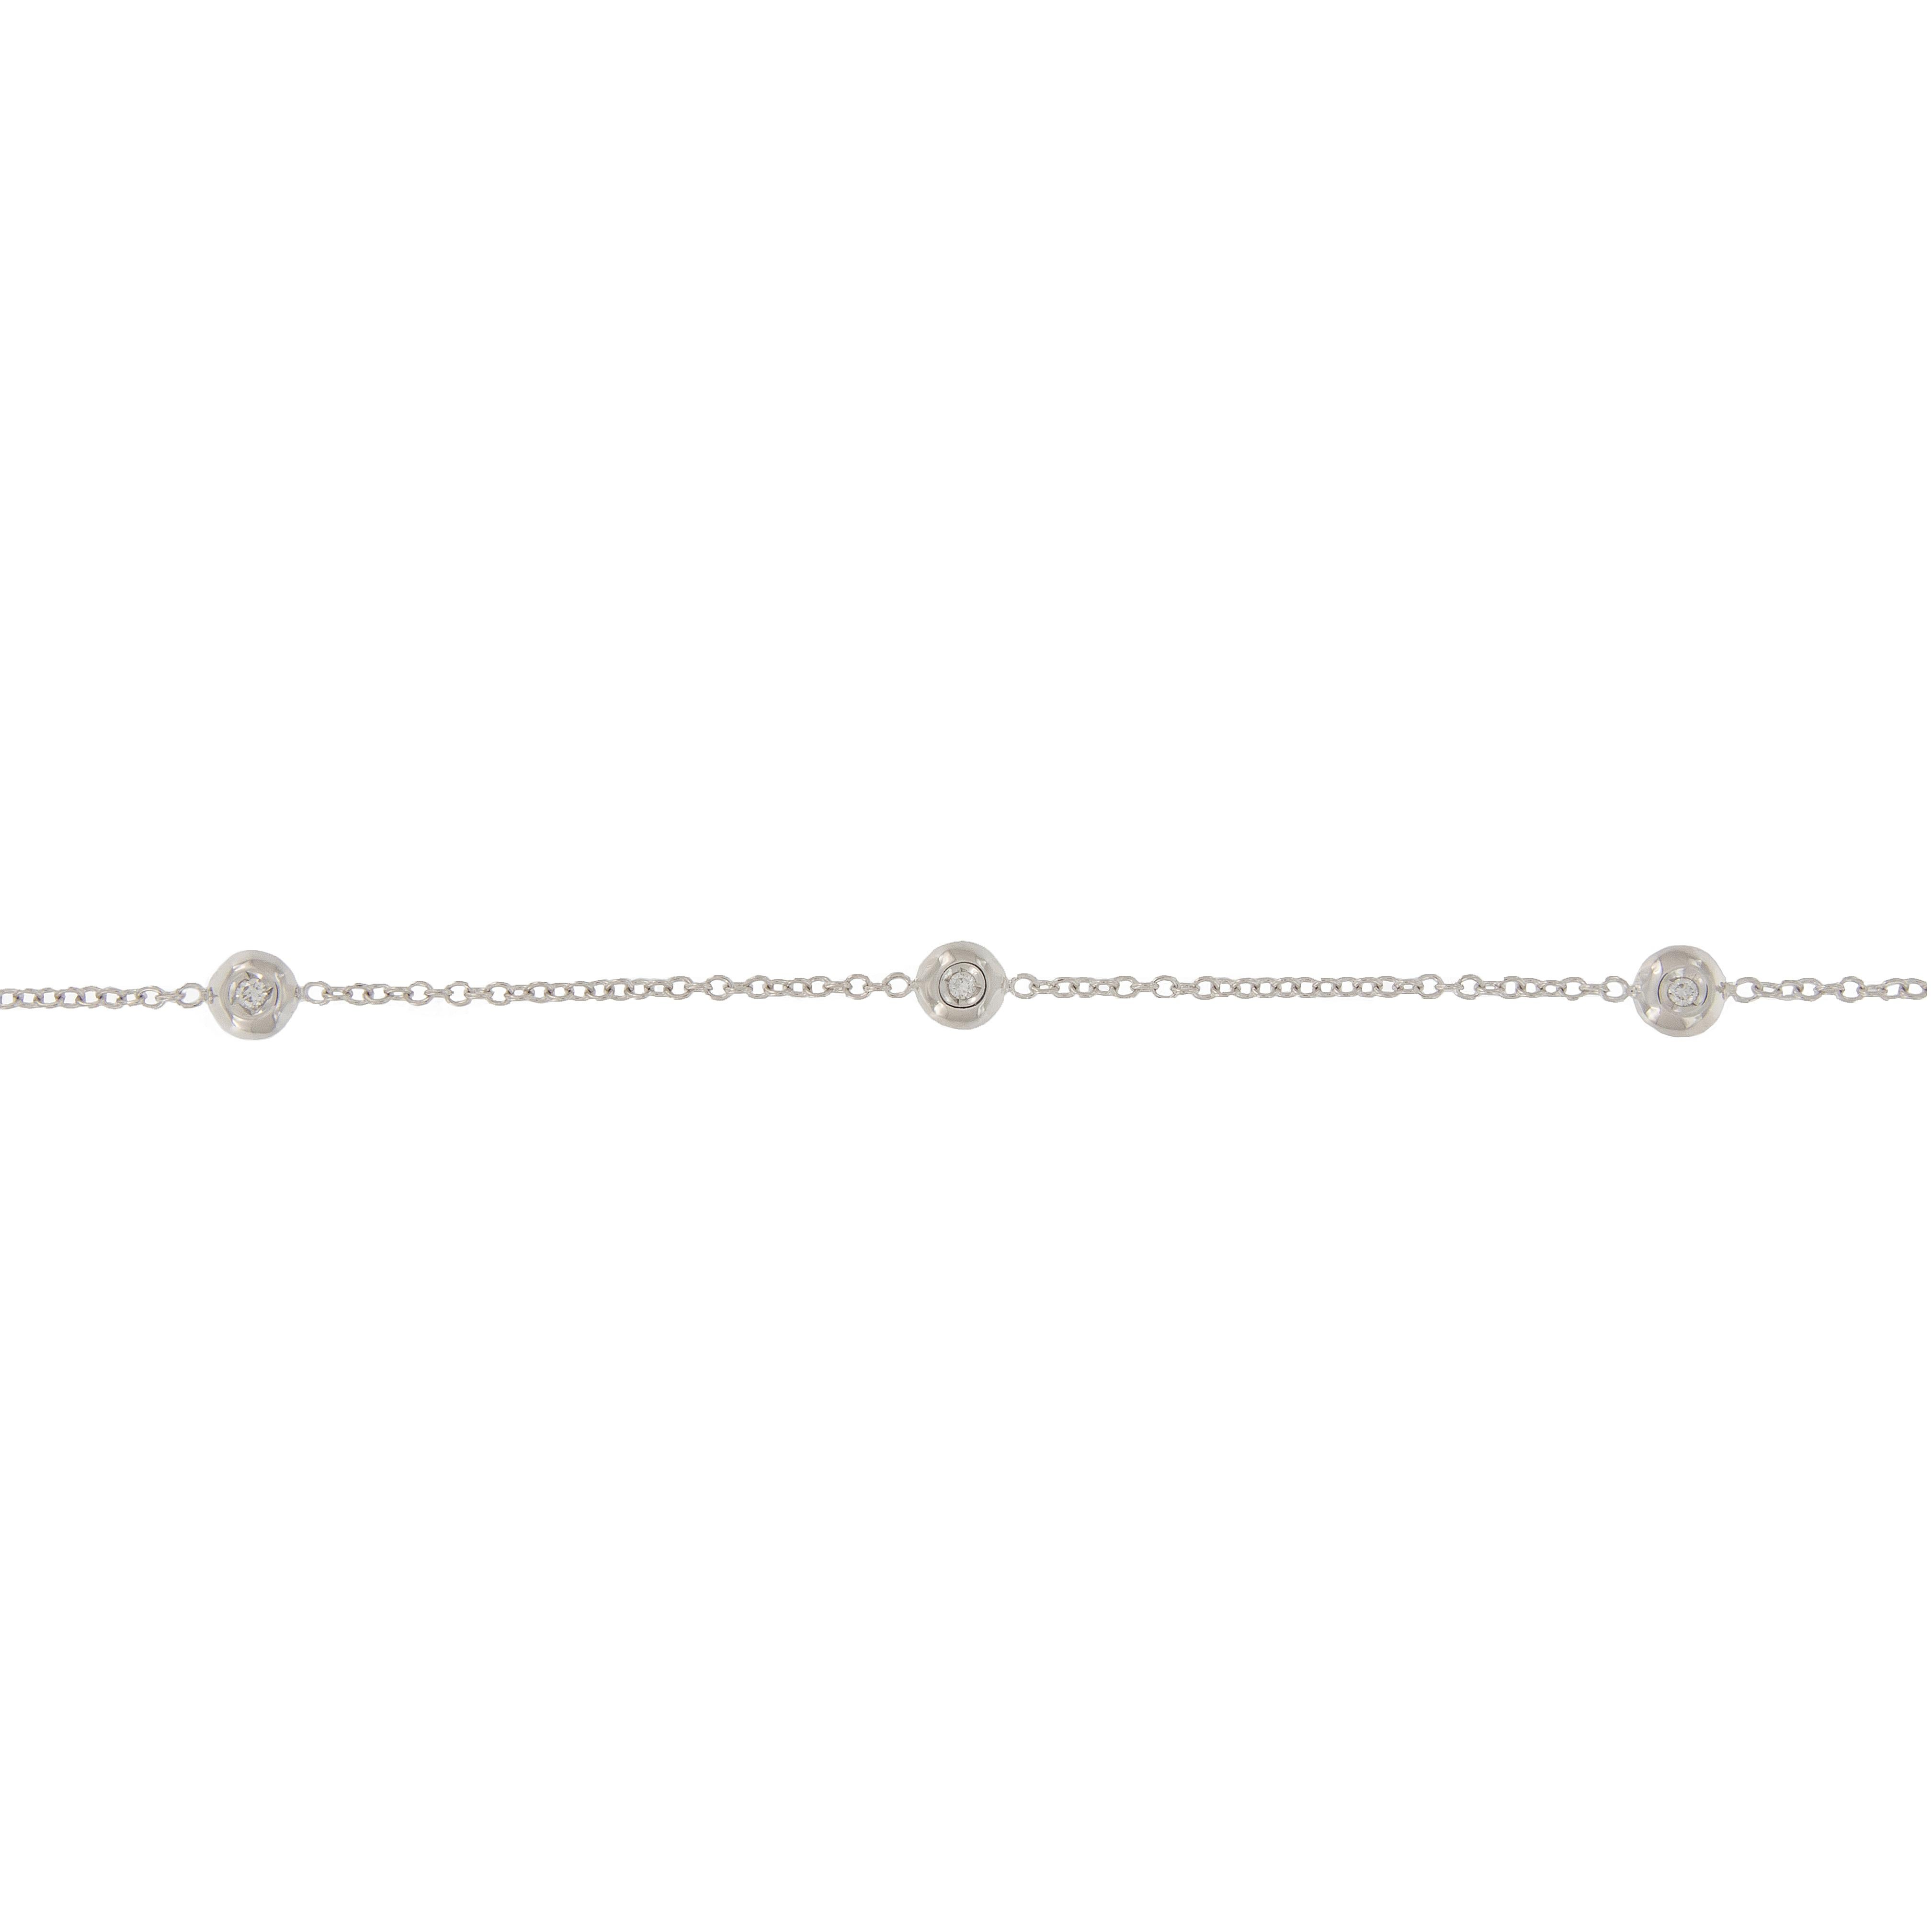 Classic and perfect for everyday! Diamonds by the yard necklace features 10 diamonds bezel set in 18k white gold and a 18k white gold chain. Measures 18 inches long. Weighs 7.1  grams.

Diamond 0.44 ct